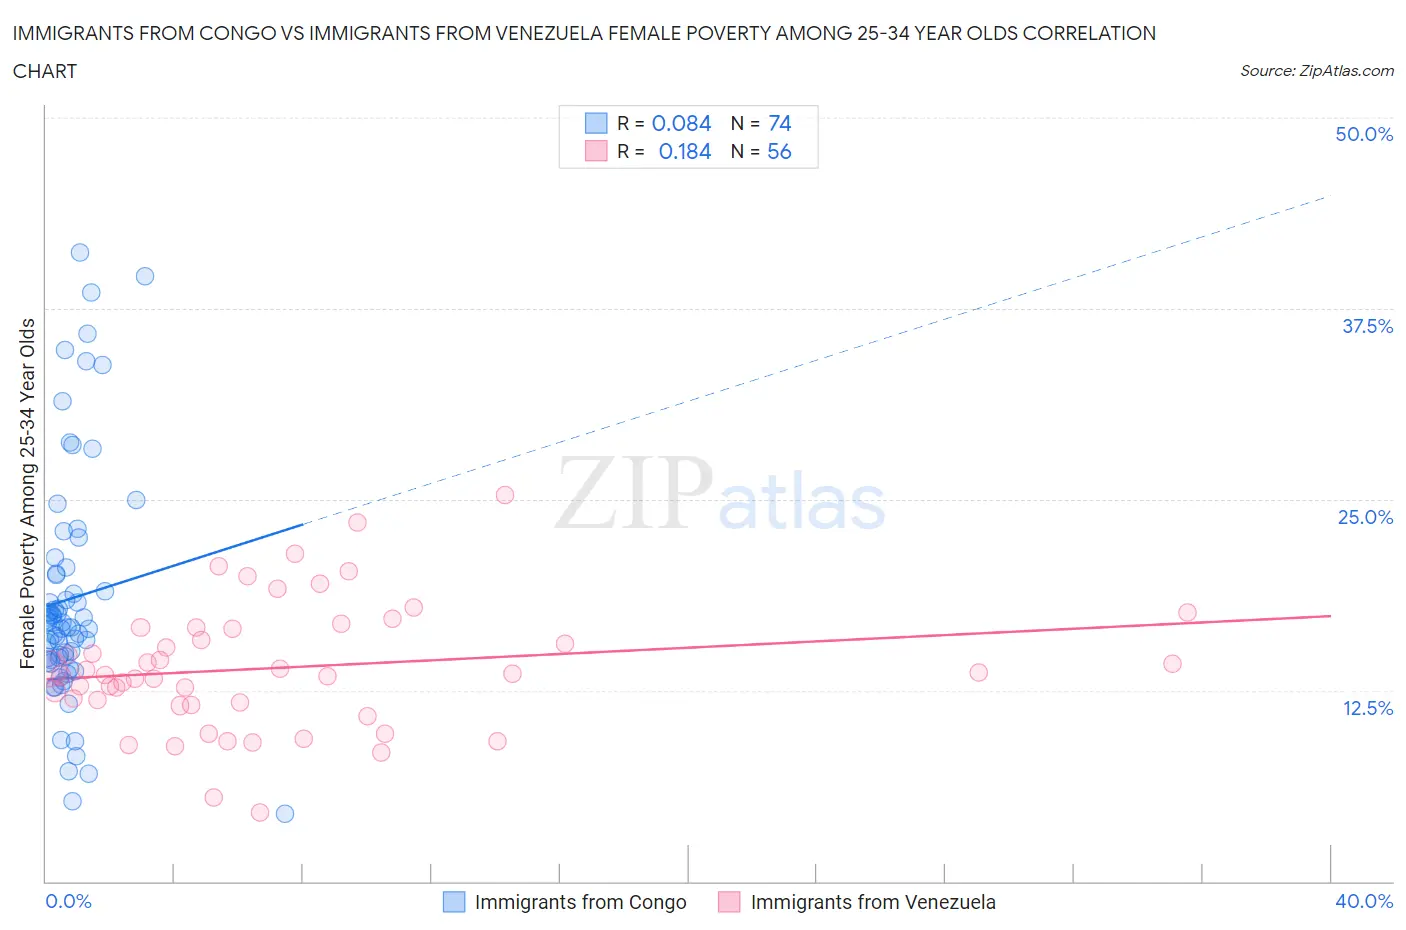 Immigrants from Congo vs Immigrants from Venezuela Female Poverty Among 25-34 Year Olds